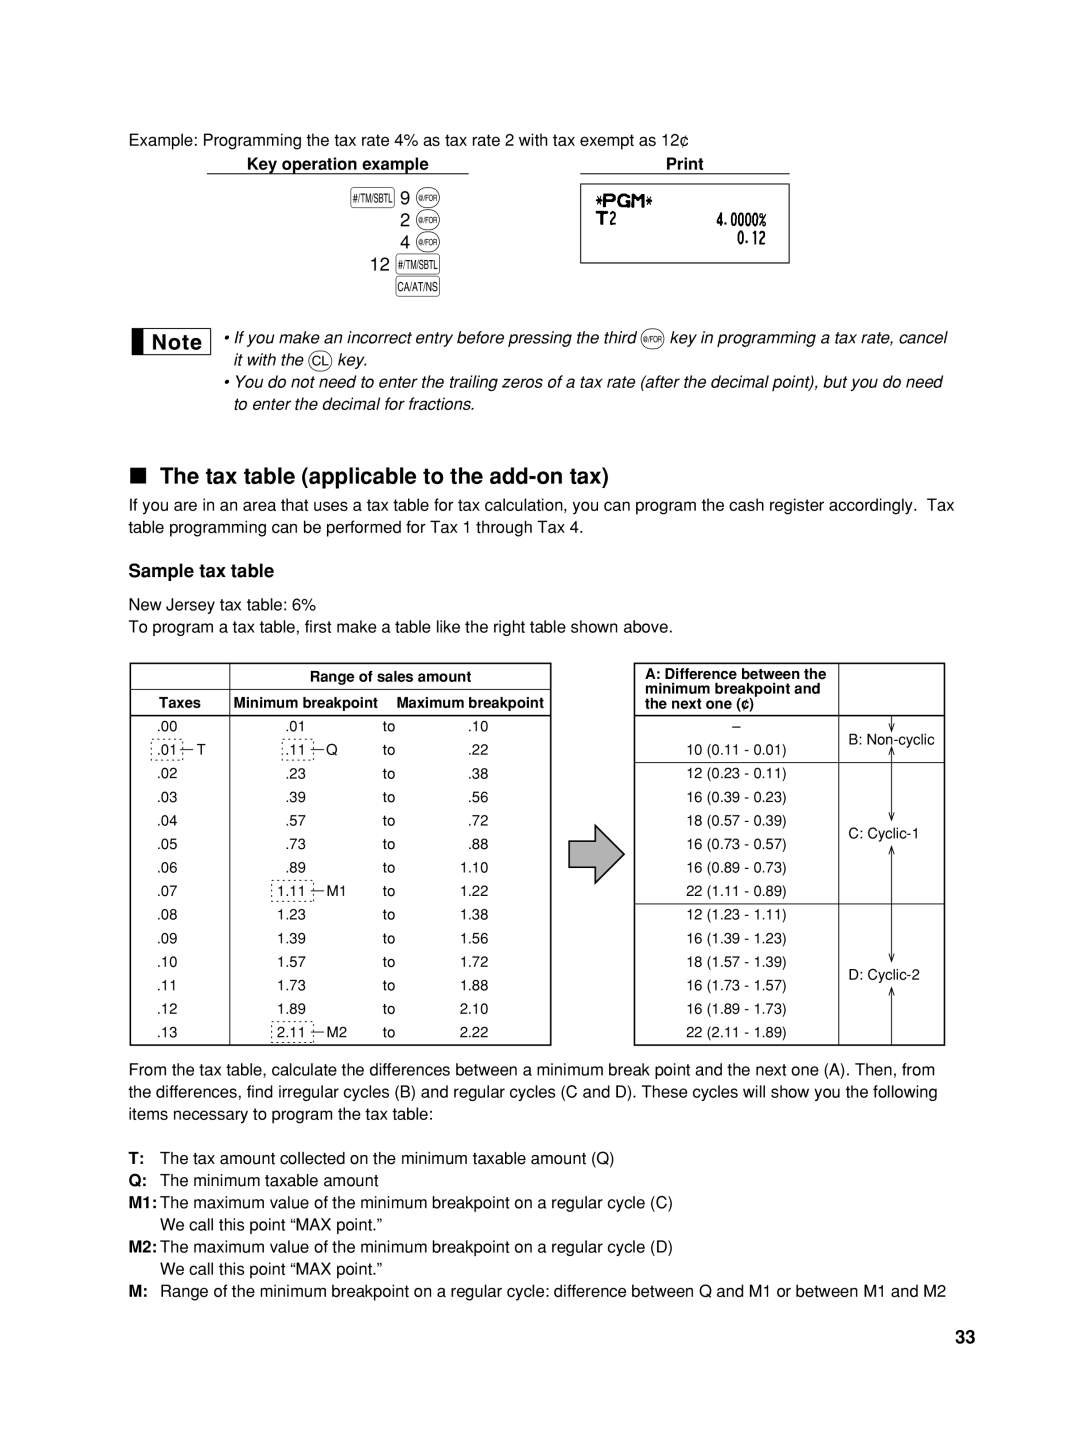 Sharp XE-A42S 12 s A, The tax table applicable to the add-on tax, Sample tax table, Key operation example, Print 